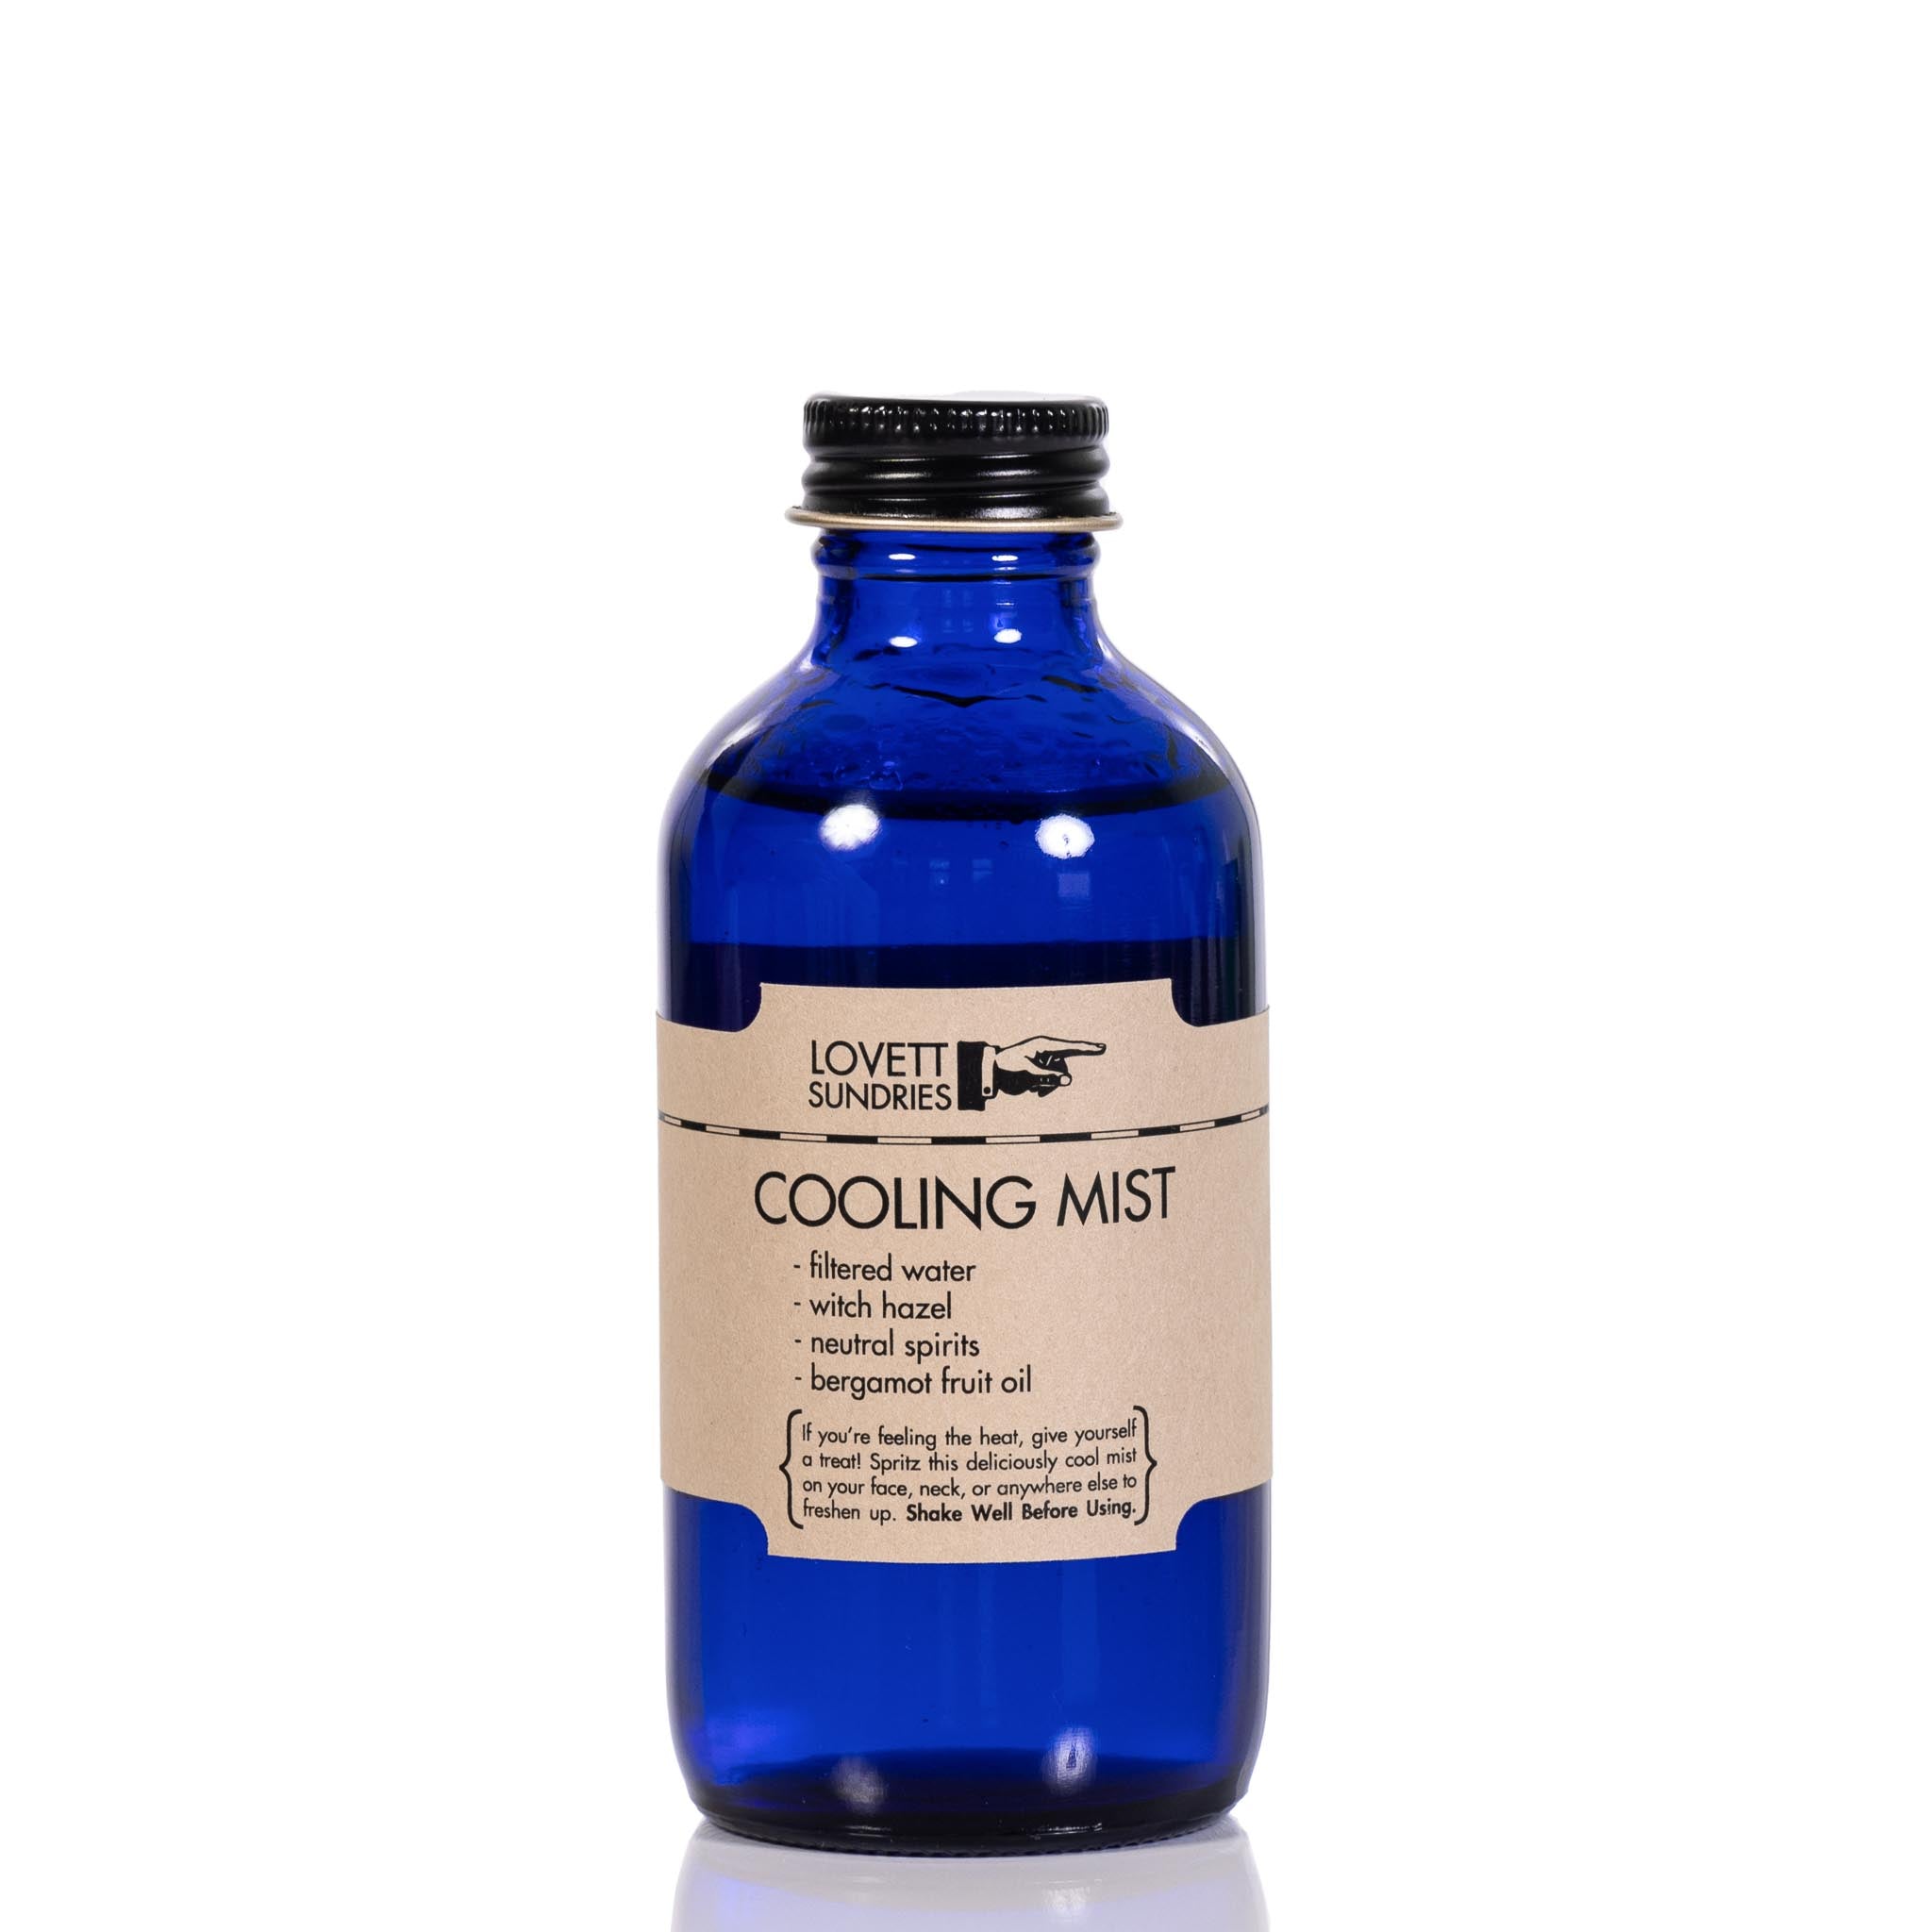 Refillable blue bottle of cooling mist spray bottle with label against a white background.